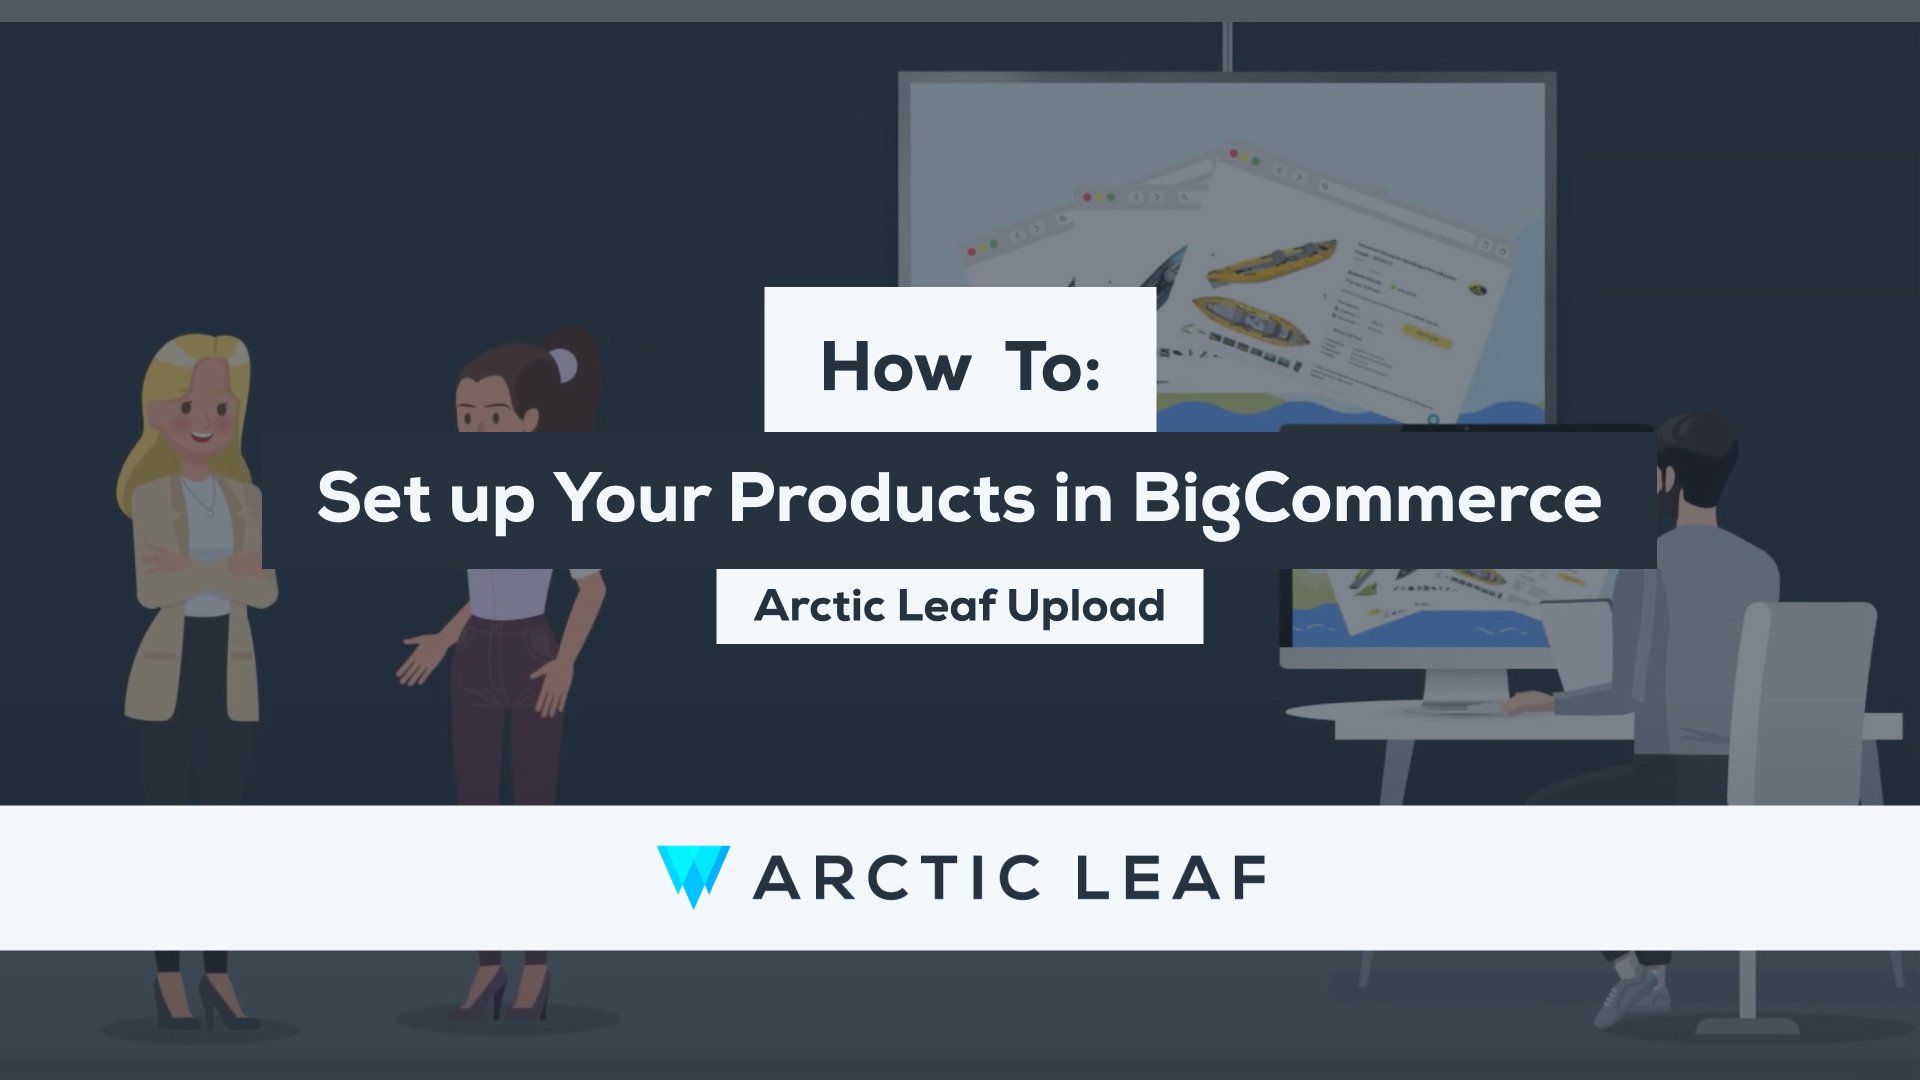 How To: Set Up Your Products in BigCommerce - Arctic Leaf Upload